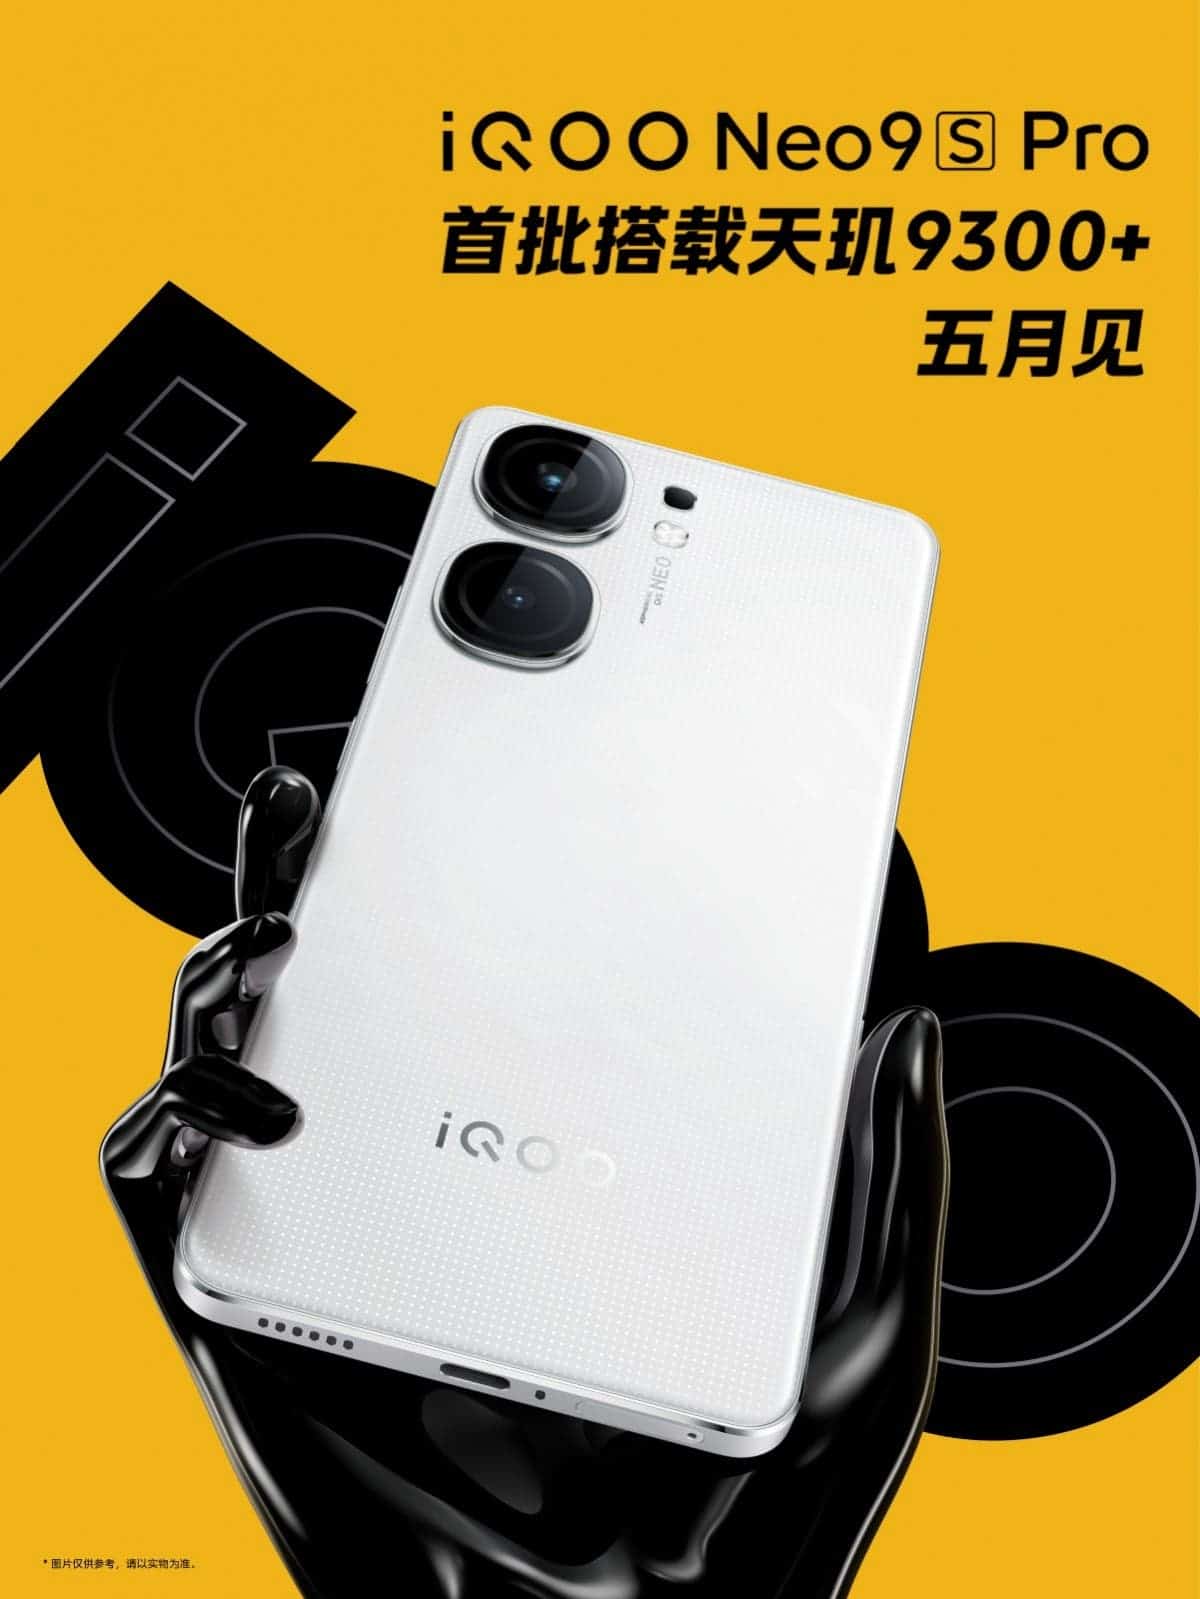 Official poster of iQOO Neo 9s Pro